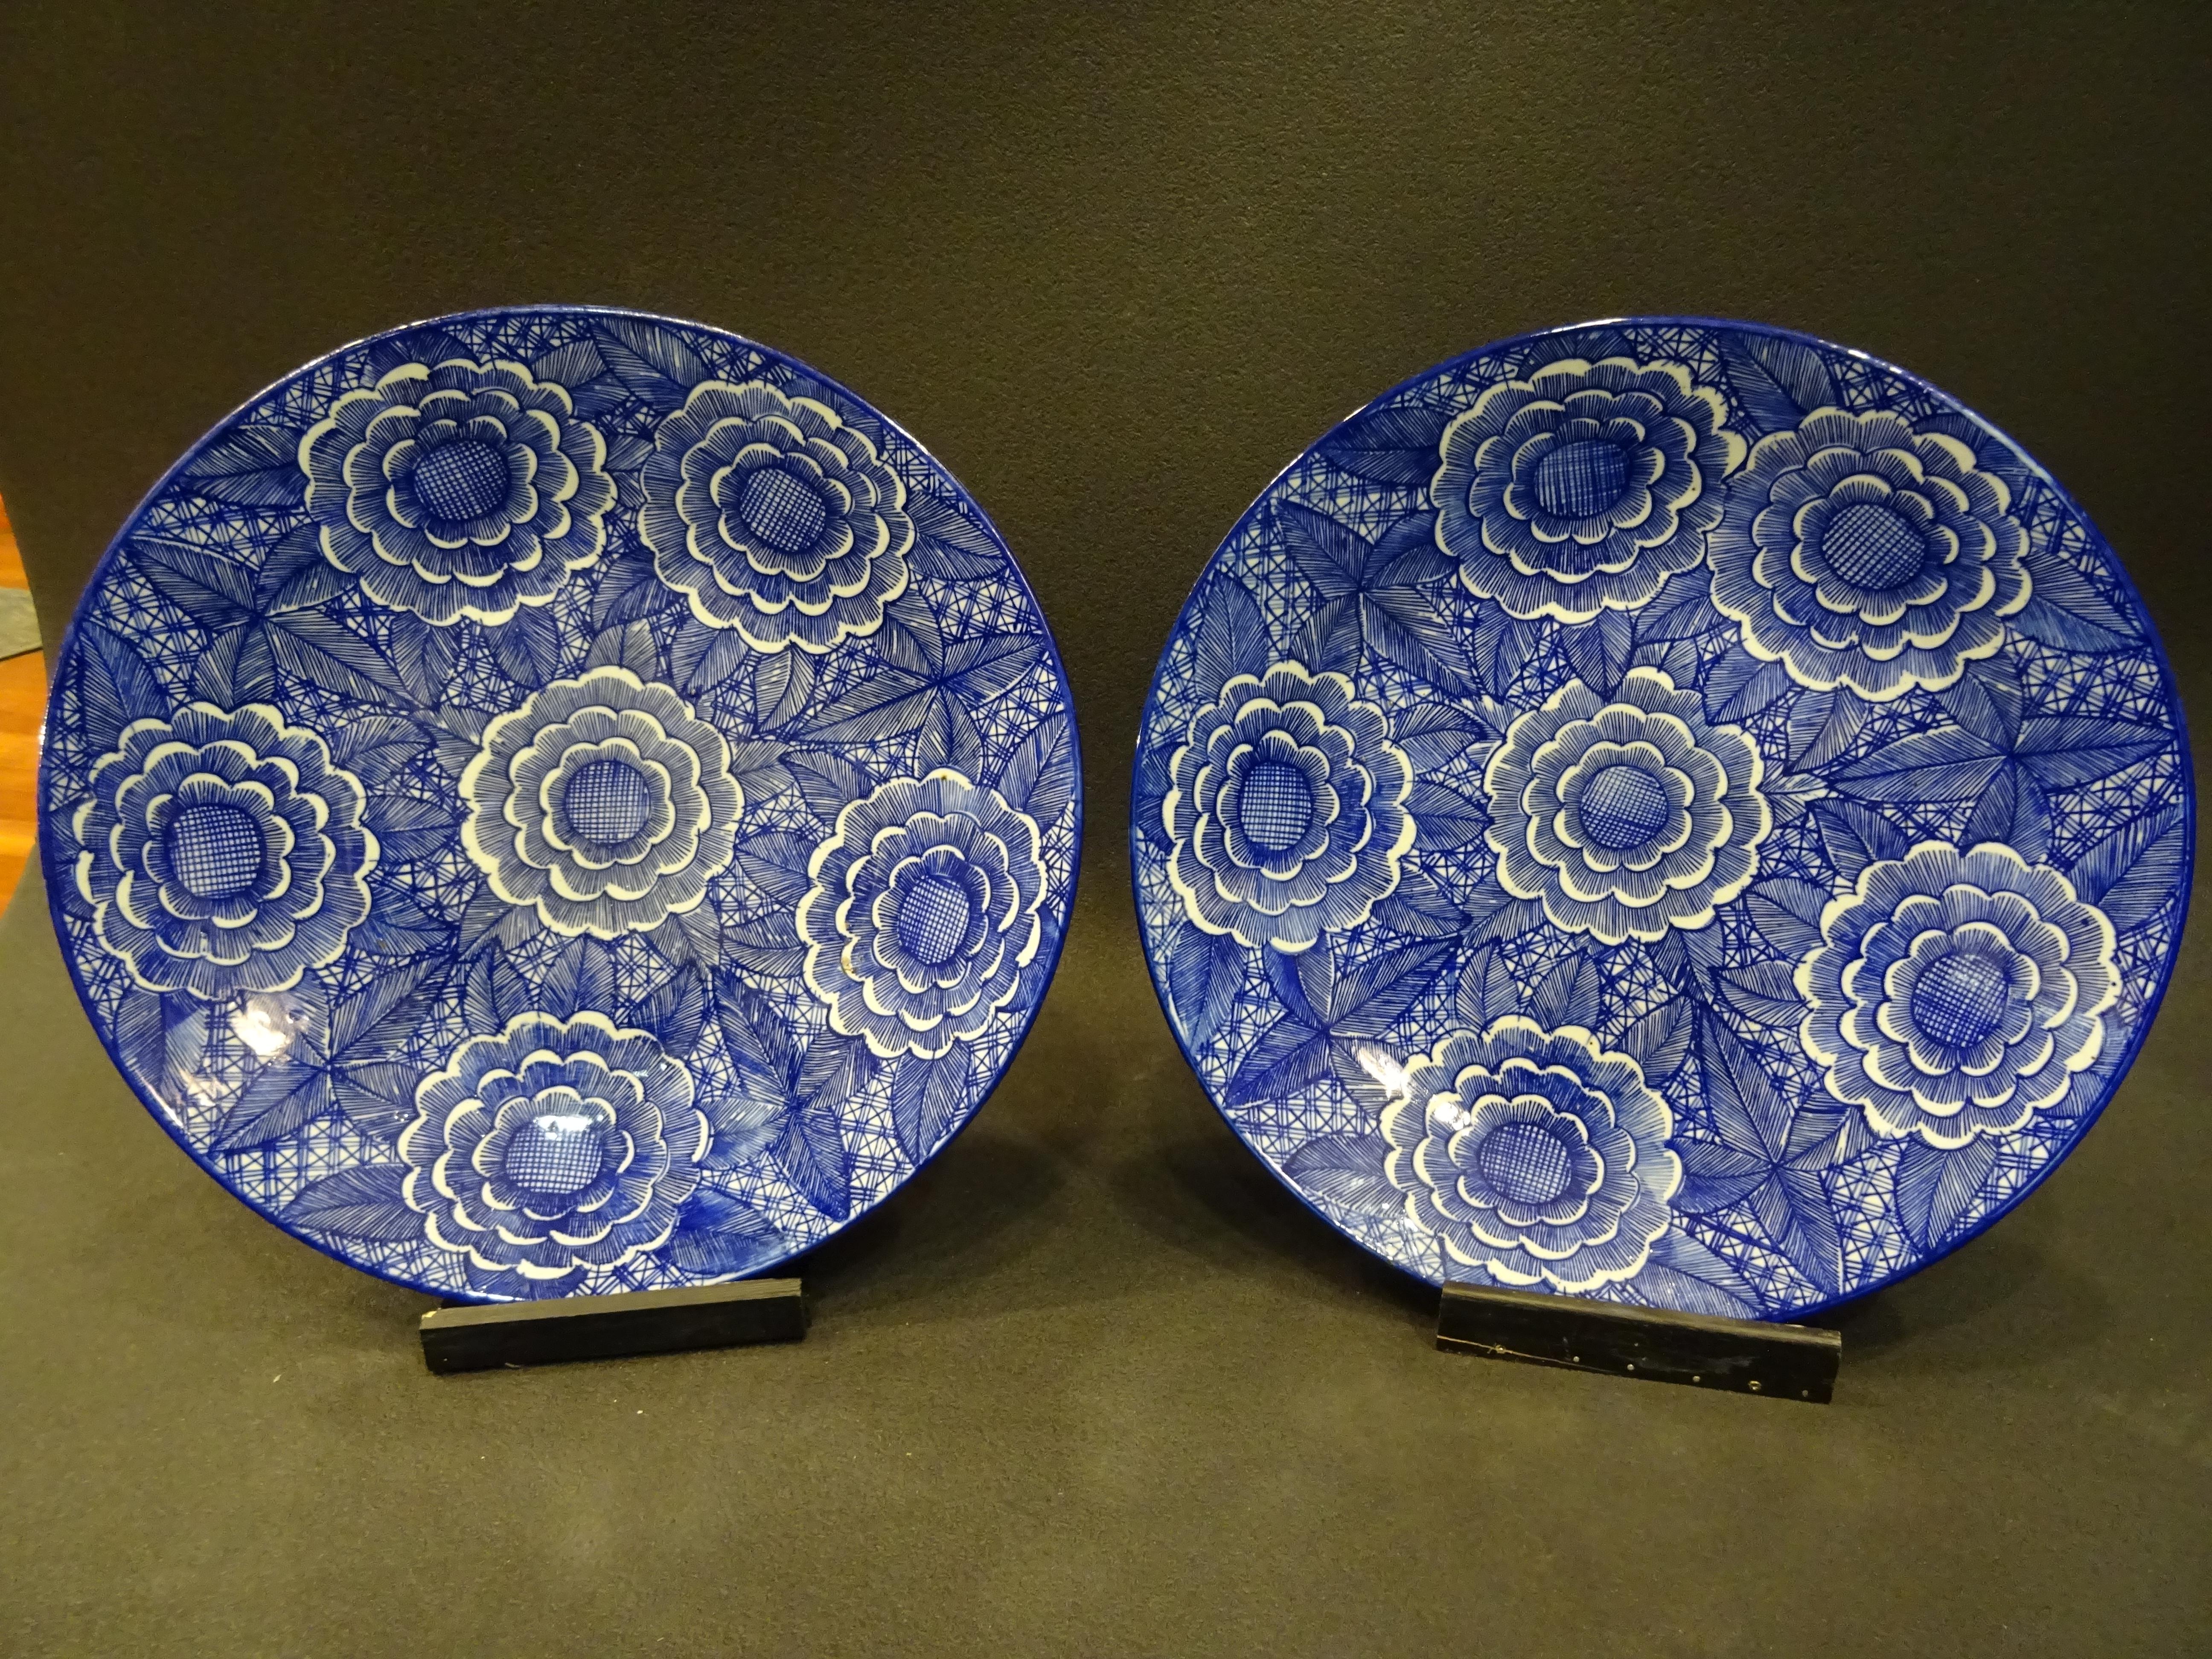 Set of 2 amazing very large blue and white Imari chargers in original box - Japan - Meiji period (1868-1912),
circa 1897
Paire of stunning 2 very large blue and white Imari chargers in original box.
With an intriguing graphic design of peony flowers